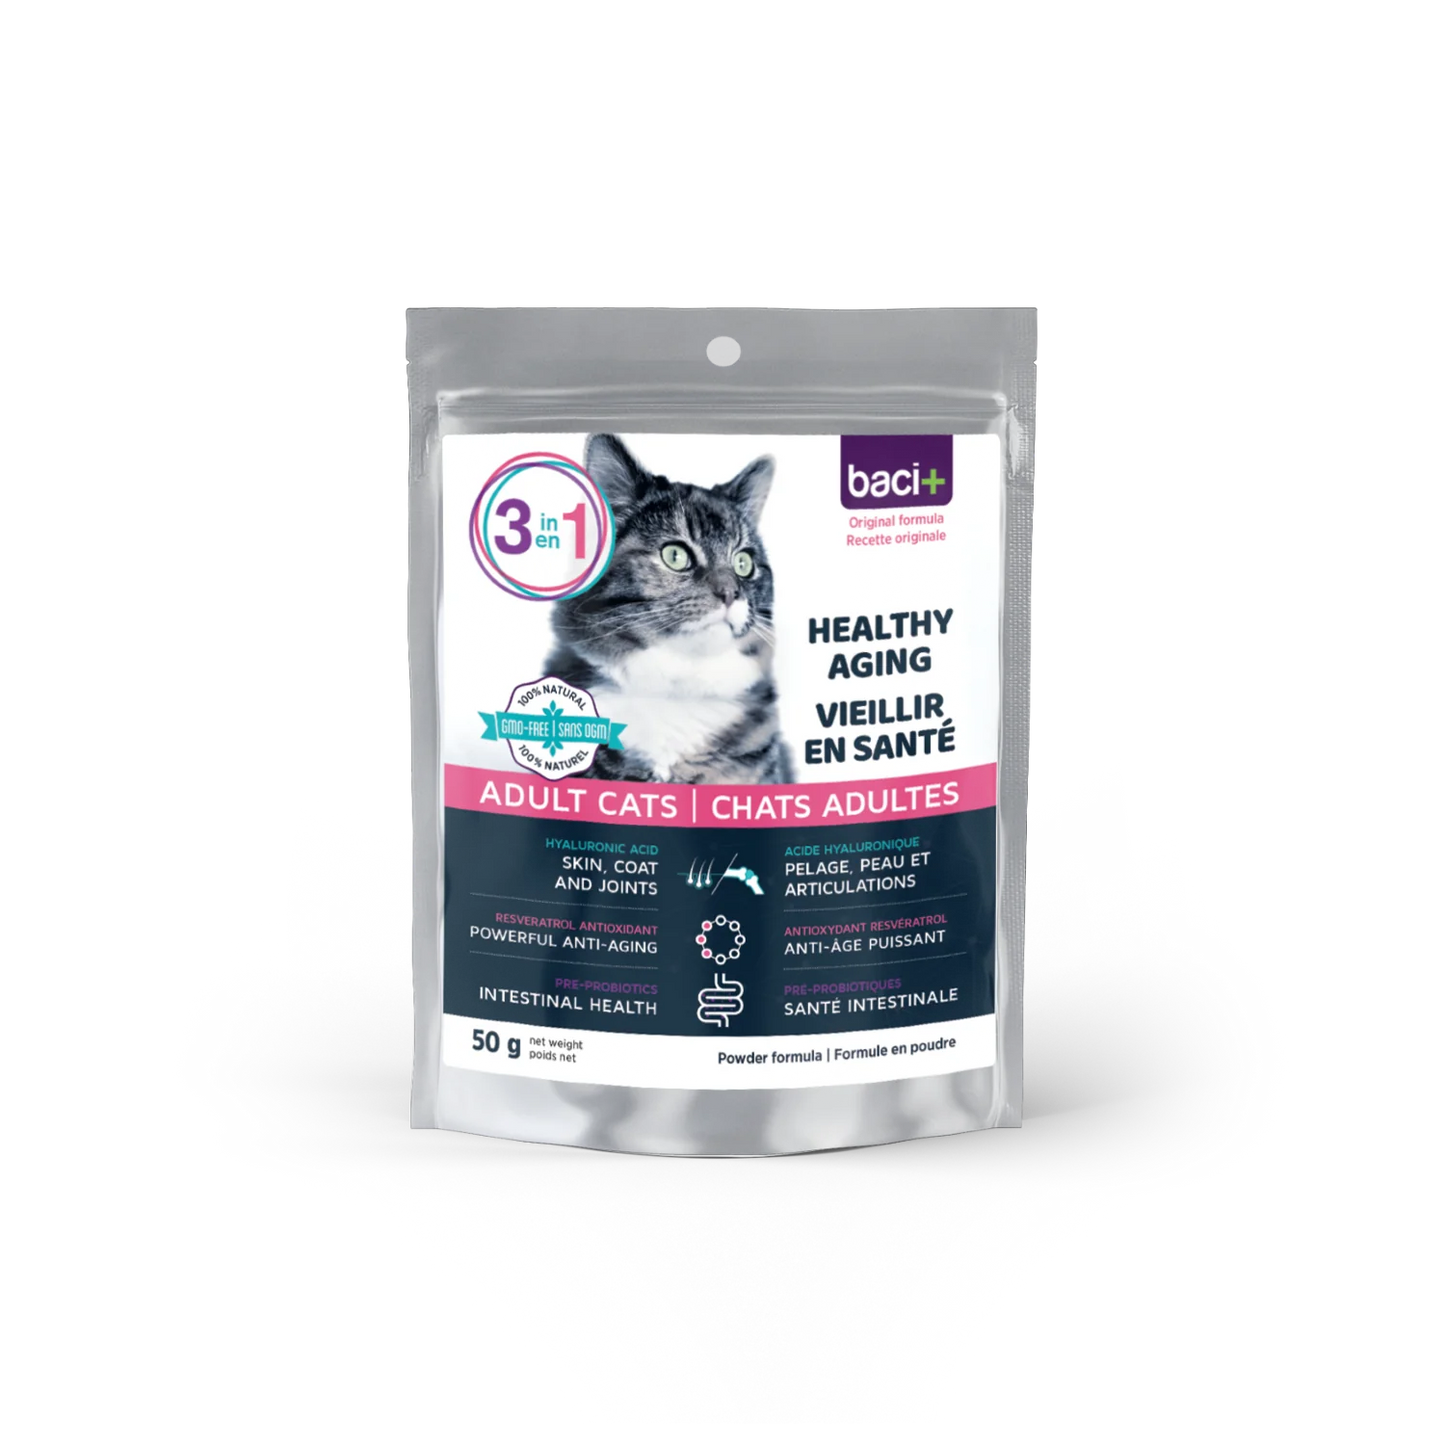 Baci+ 3-in-1 Healthy Aging for Adult Cats - 50g